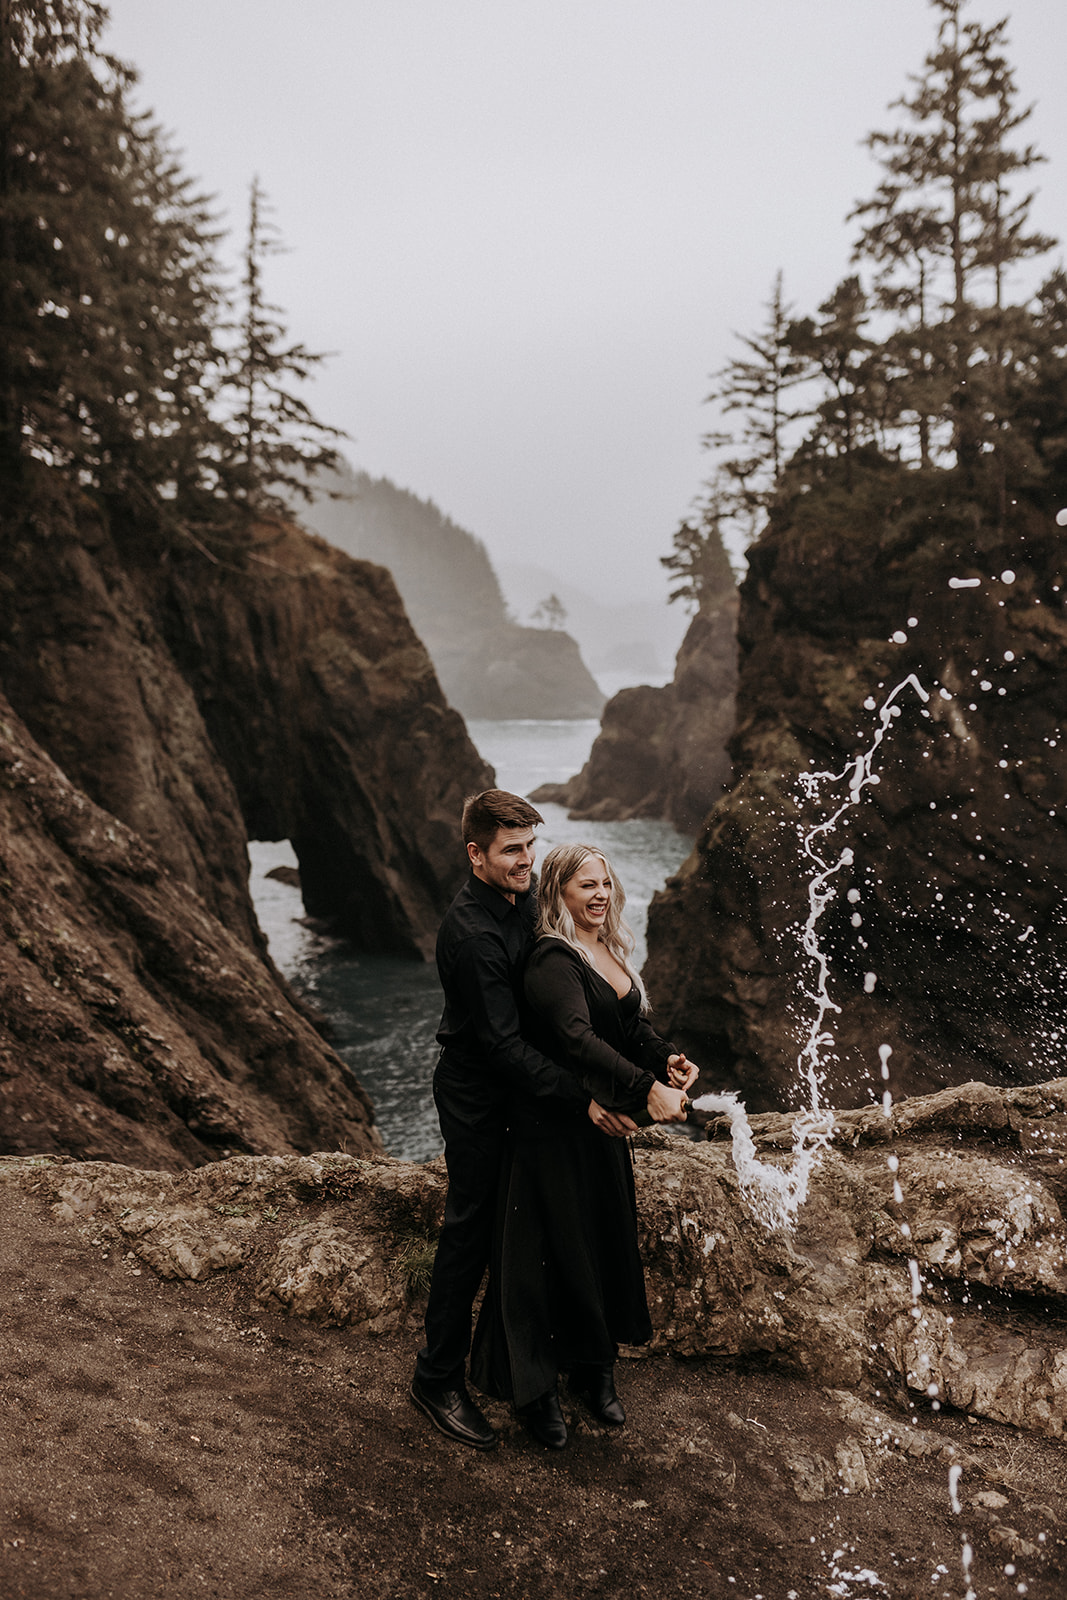 An elopement couple wearing all black spraying champagne on the Southern Oregon coast.